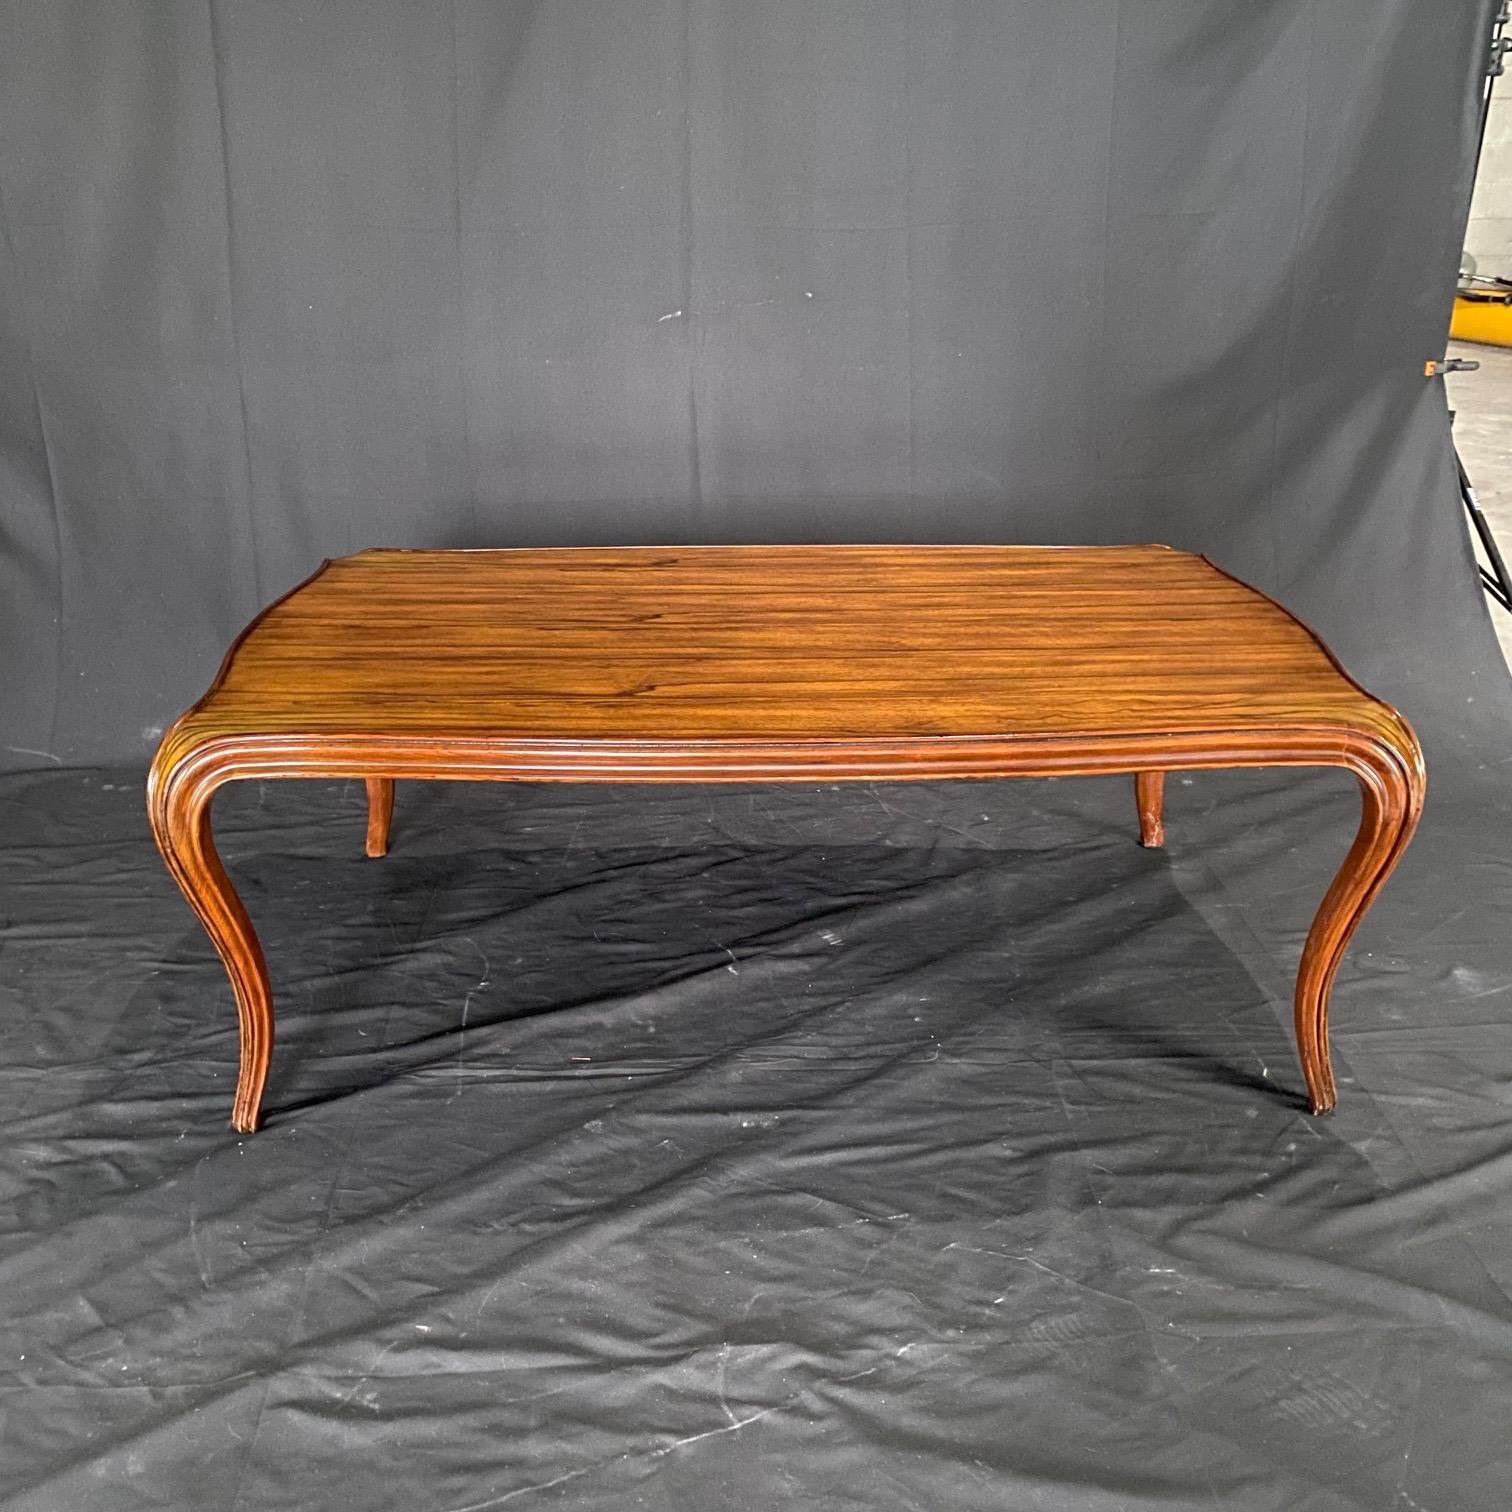 Elegant Mid-Century Modern Curved Coffee Table by Keno Bros. In Good Condition For Sale In Hopewell, NJ